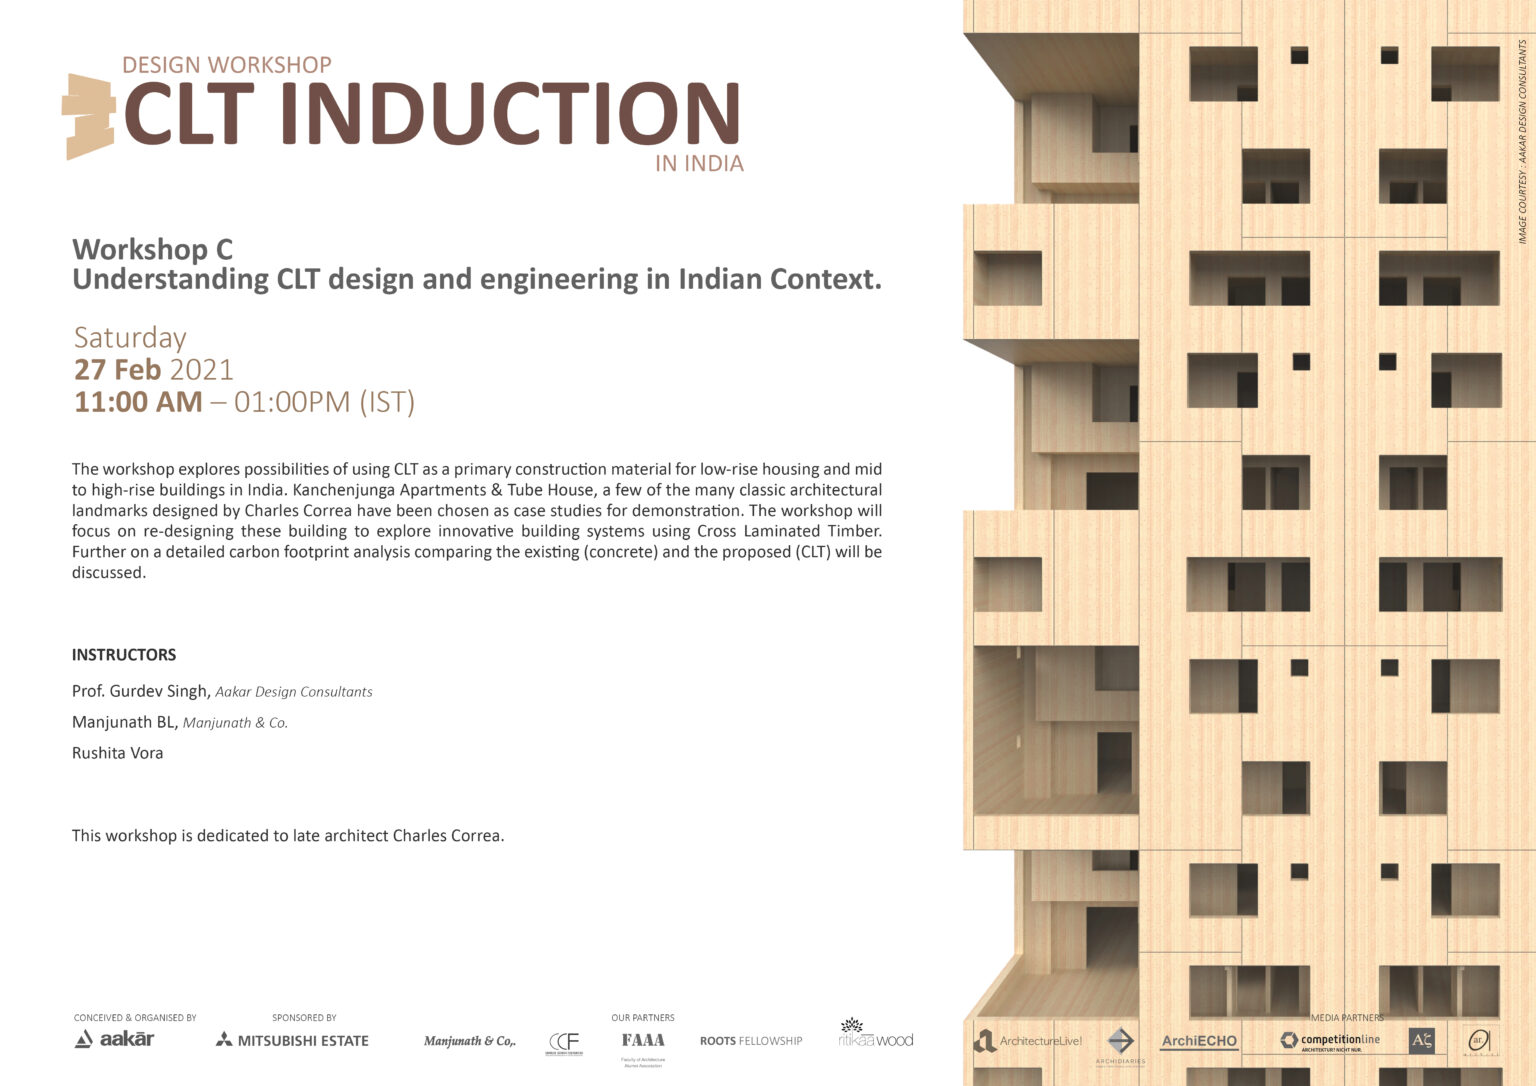 CLT Induction in India | WORKSHOP C - Understanding CLT Design and Engineering in India Context